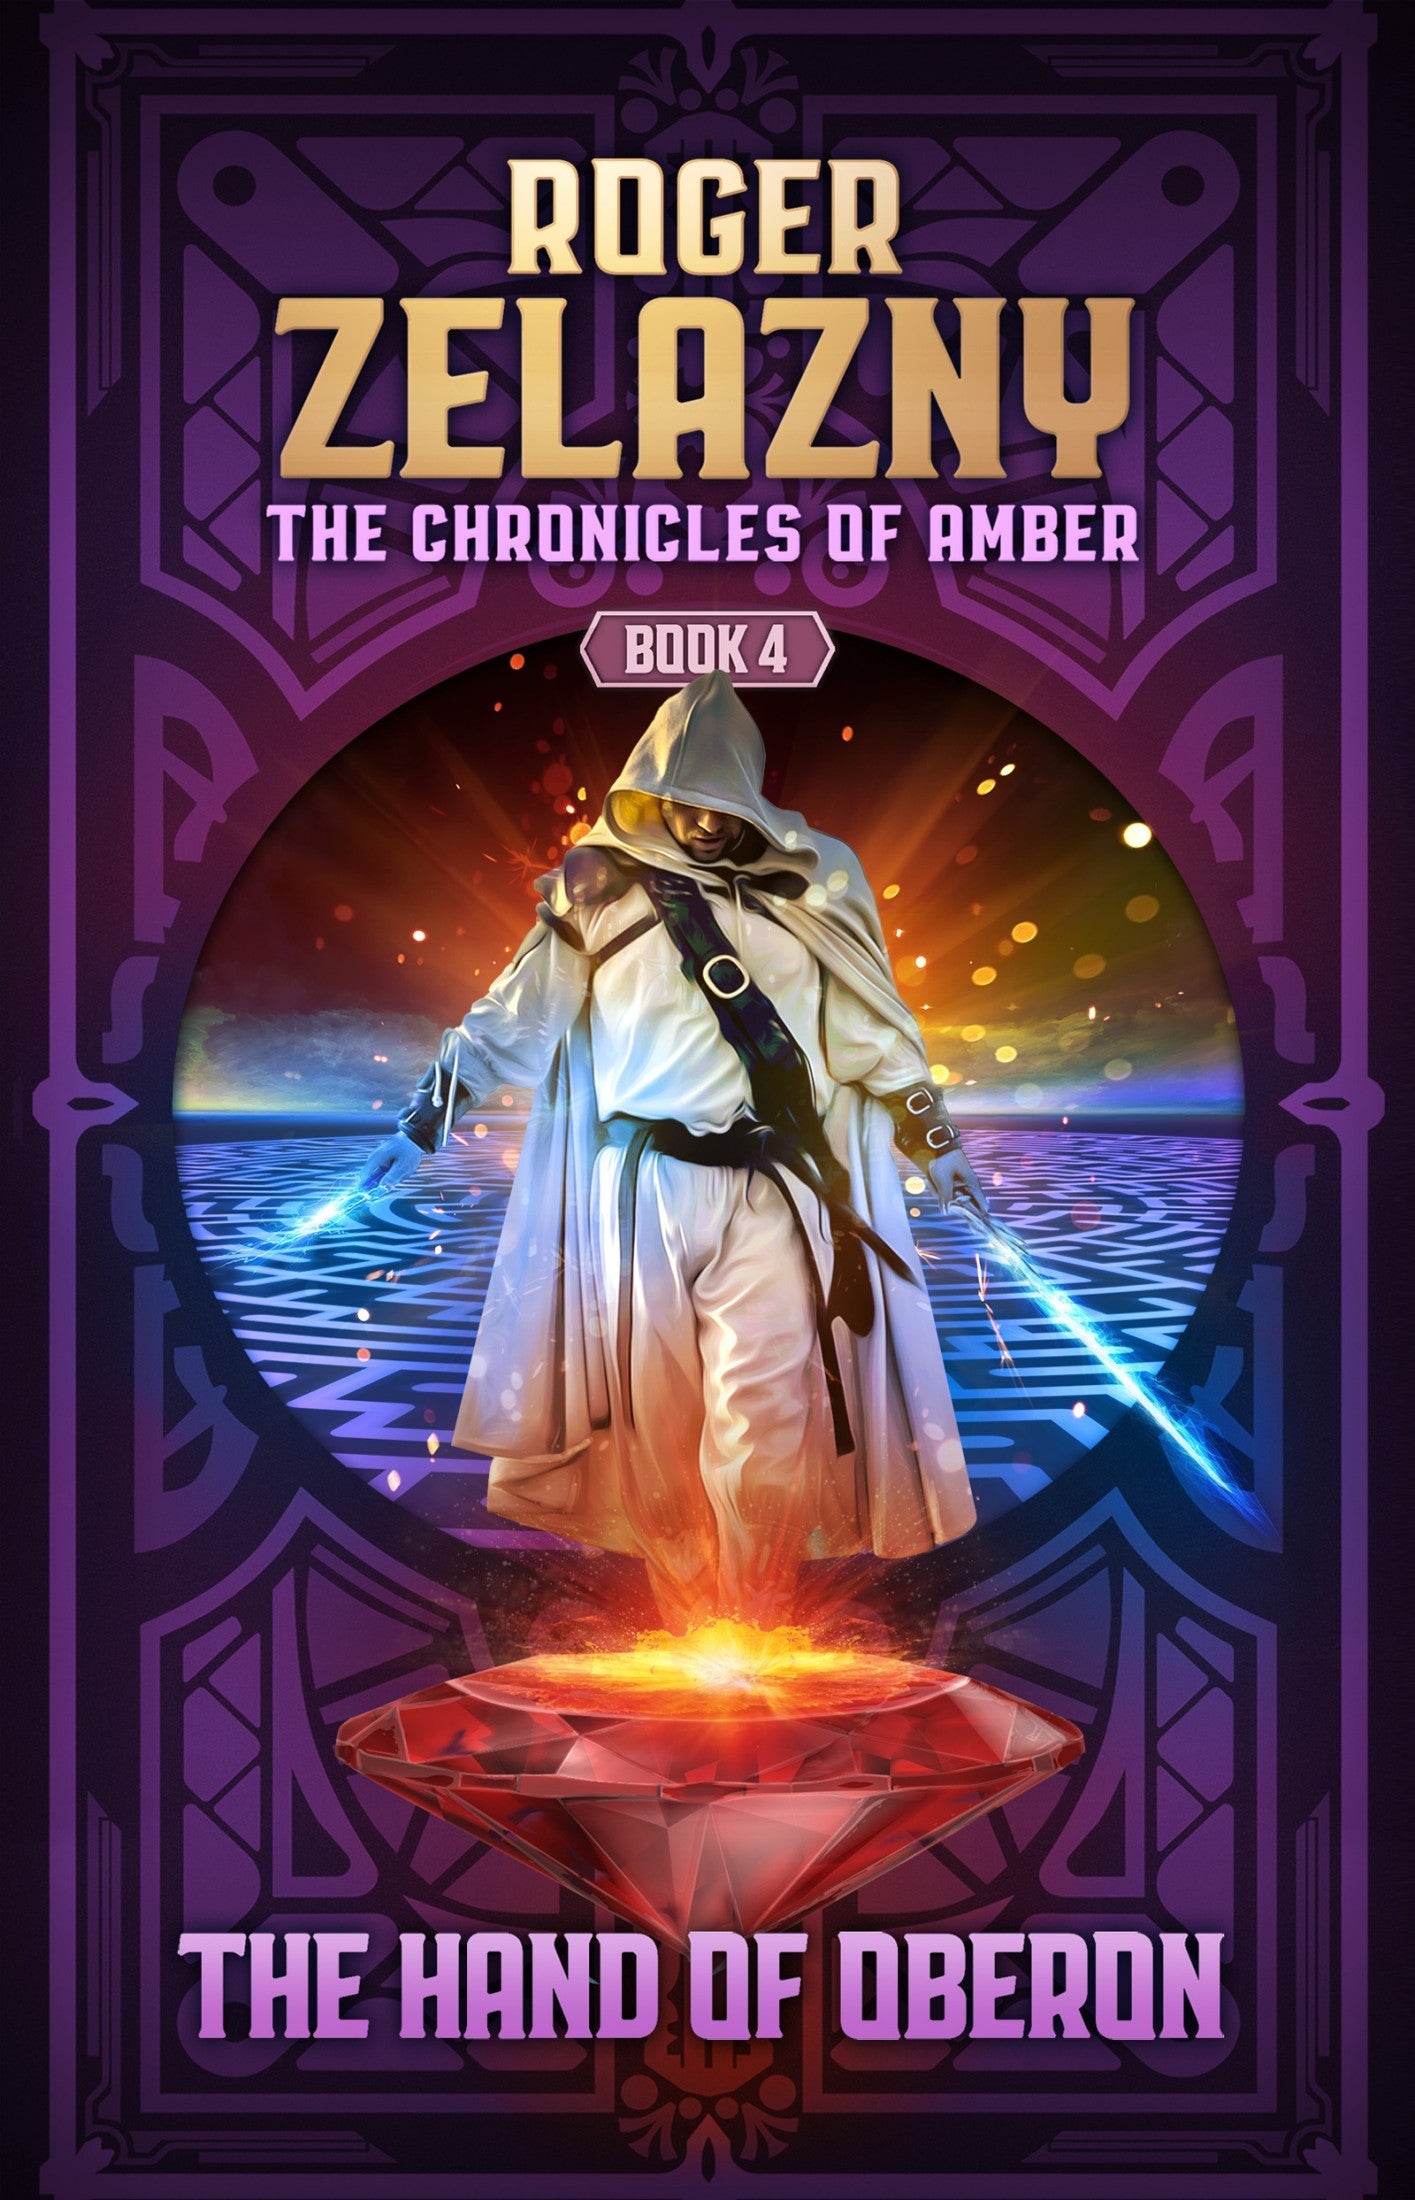 Cover art for The Hand of Oberon, the fourth book in acclaimed science fiction writer Rodger Zelazny's high fantasy series, the Chronicles of Amber.